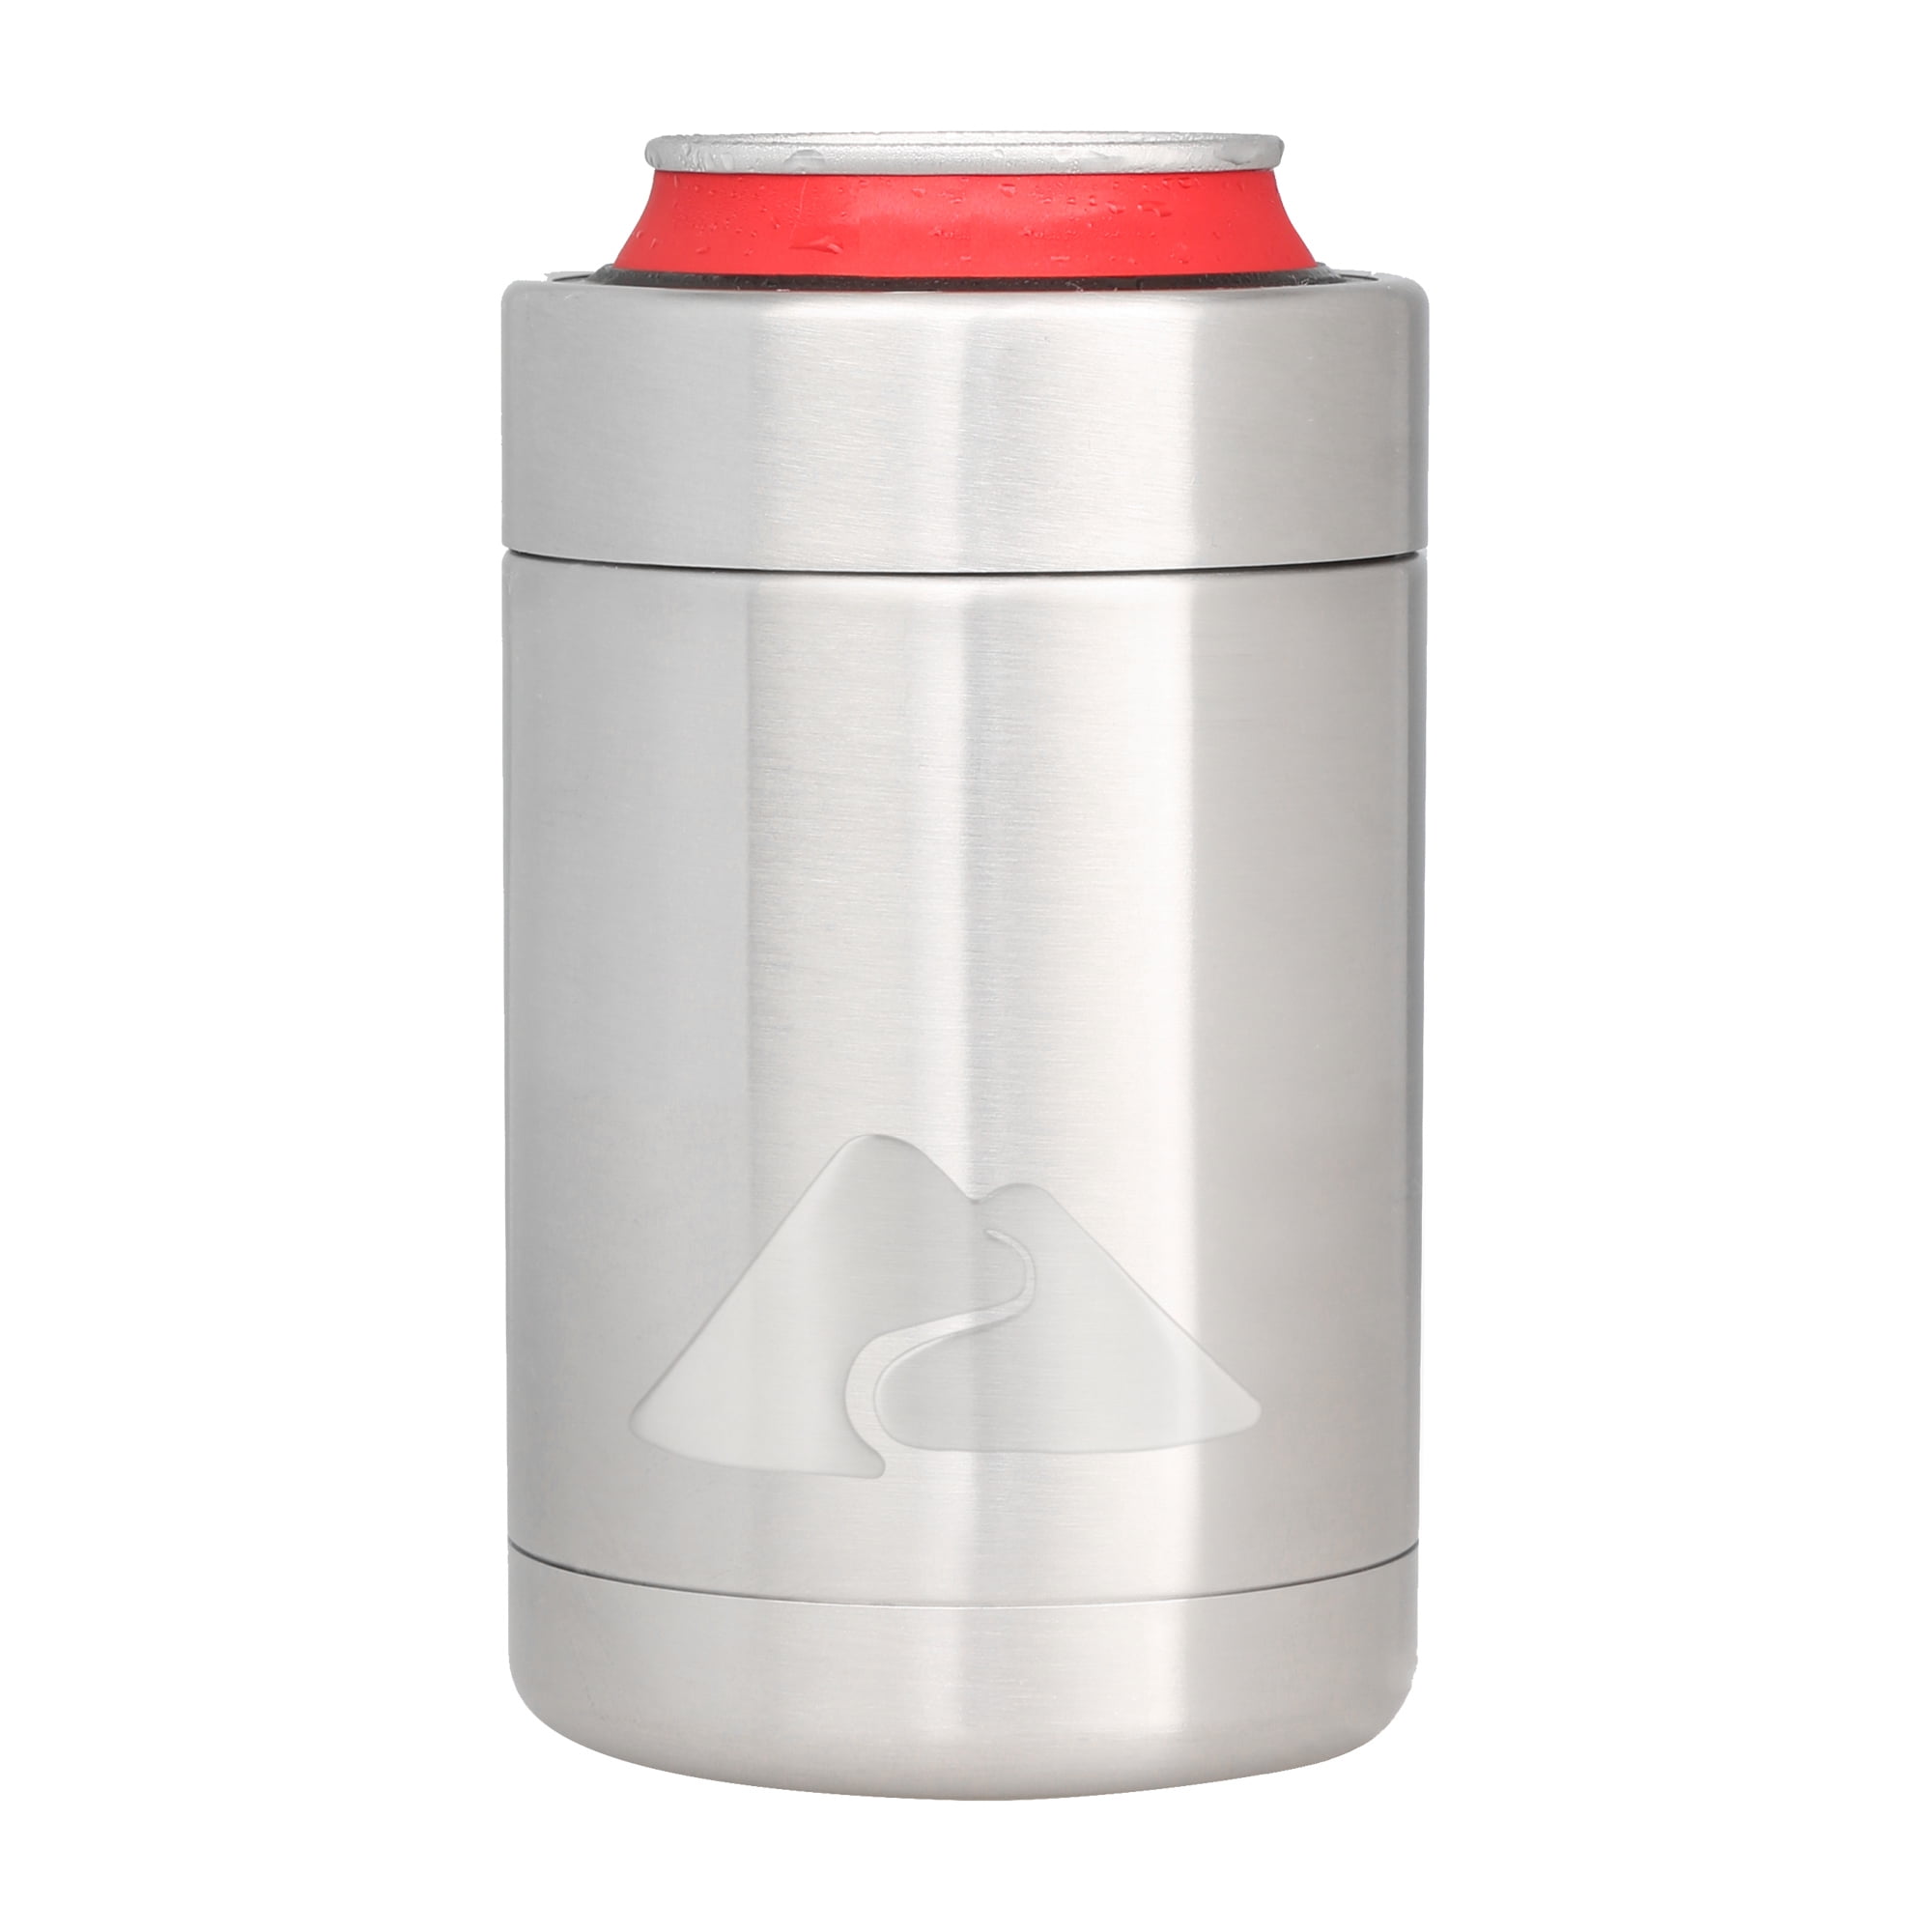 Coool-it,silicone Adaptor for Long Neck bottles.Convert Your Stainless Can Cooler to Best Long Neck Bottle insulator! Fits Yeti/Rtic/Ozark Trail Can